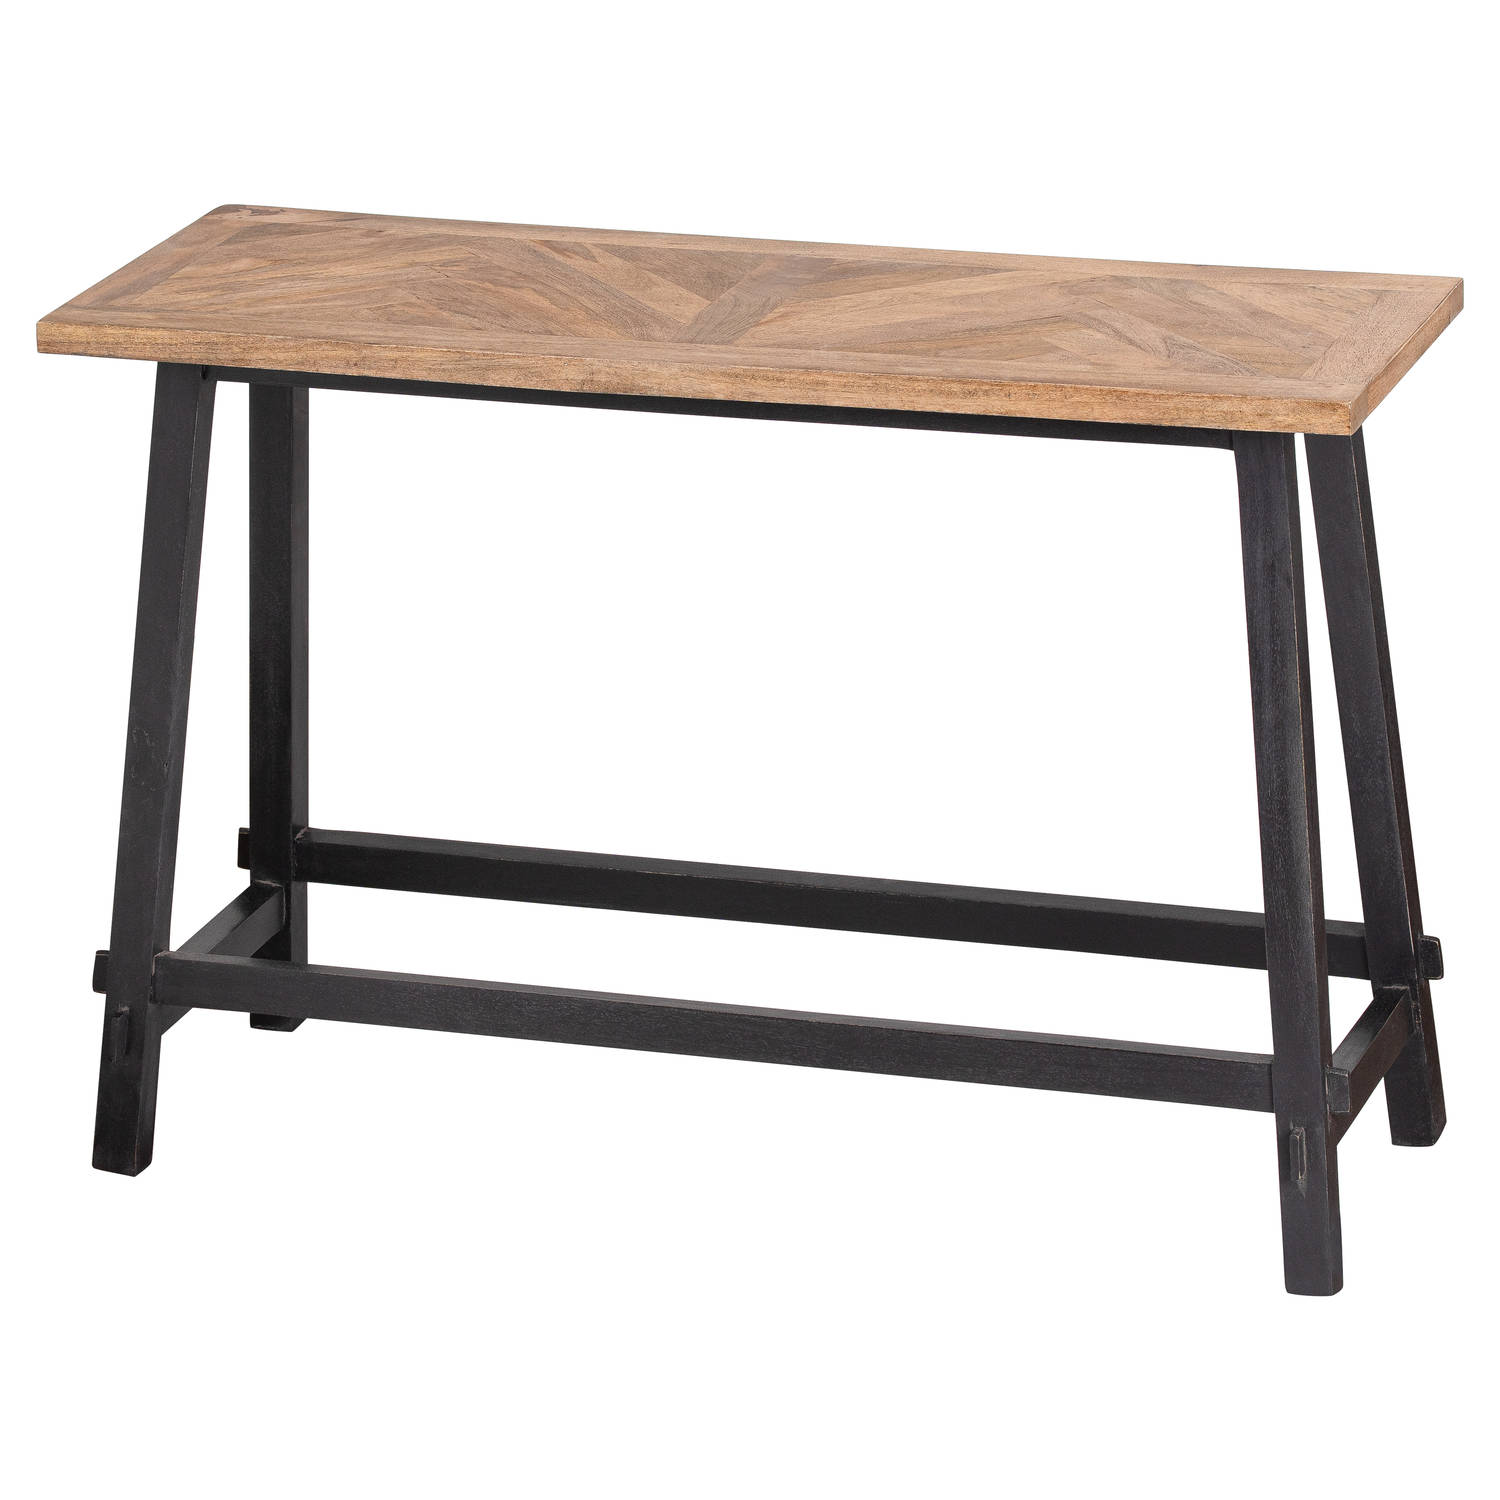 Nordic Collection Console Table - Image 1